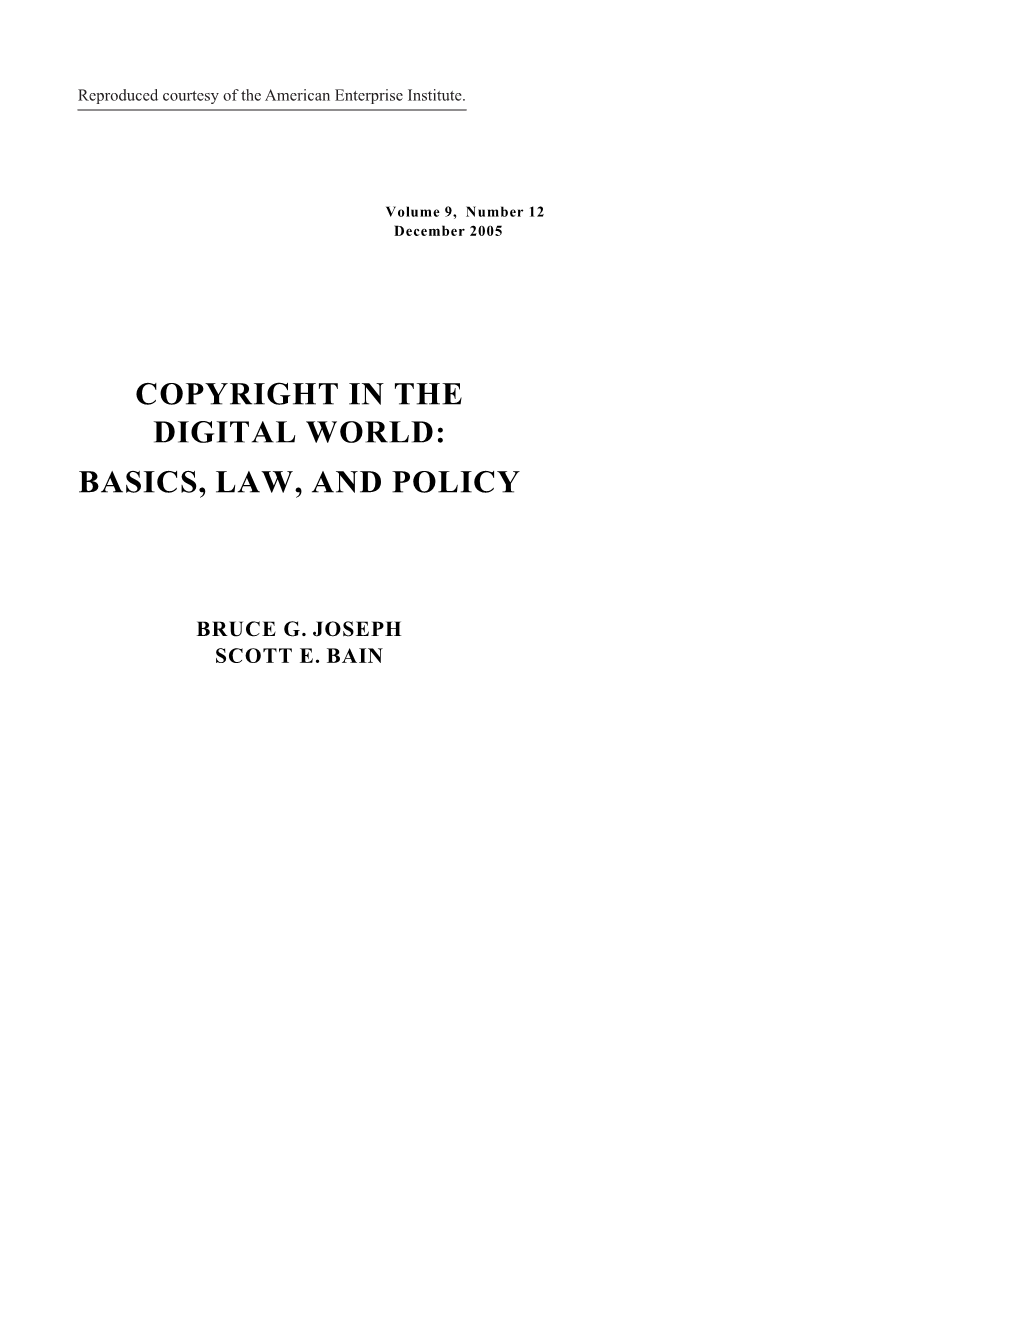 Copyright in the Digital World: Basics, Law, and Policy